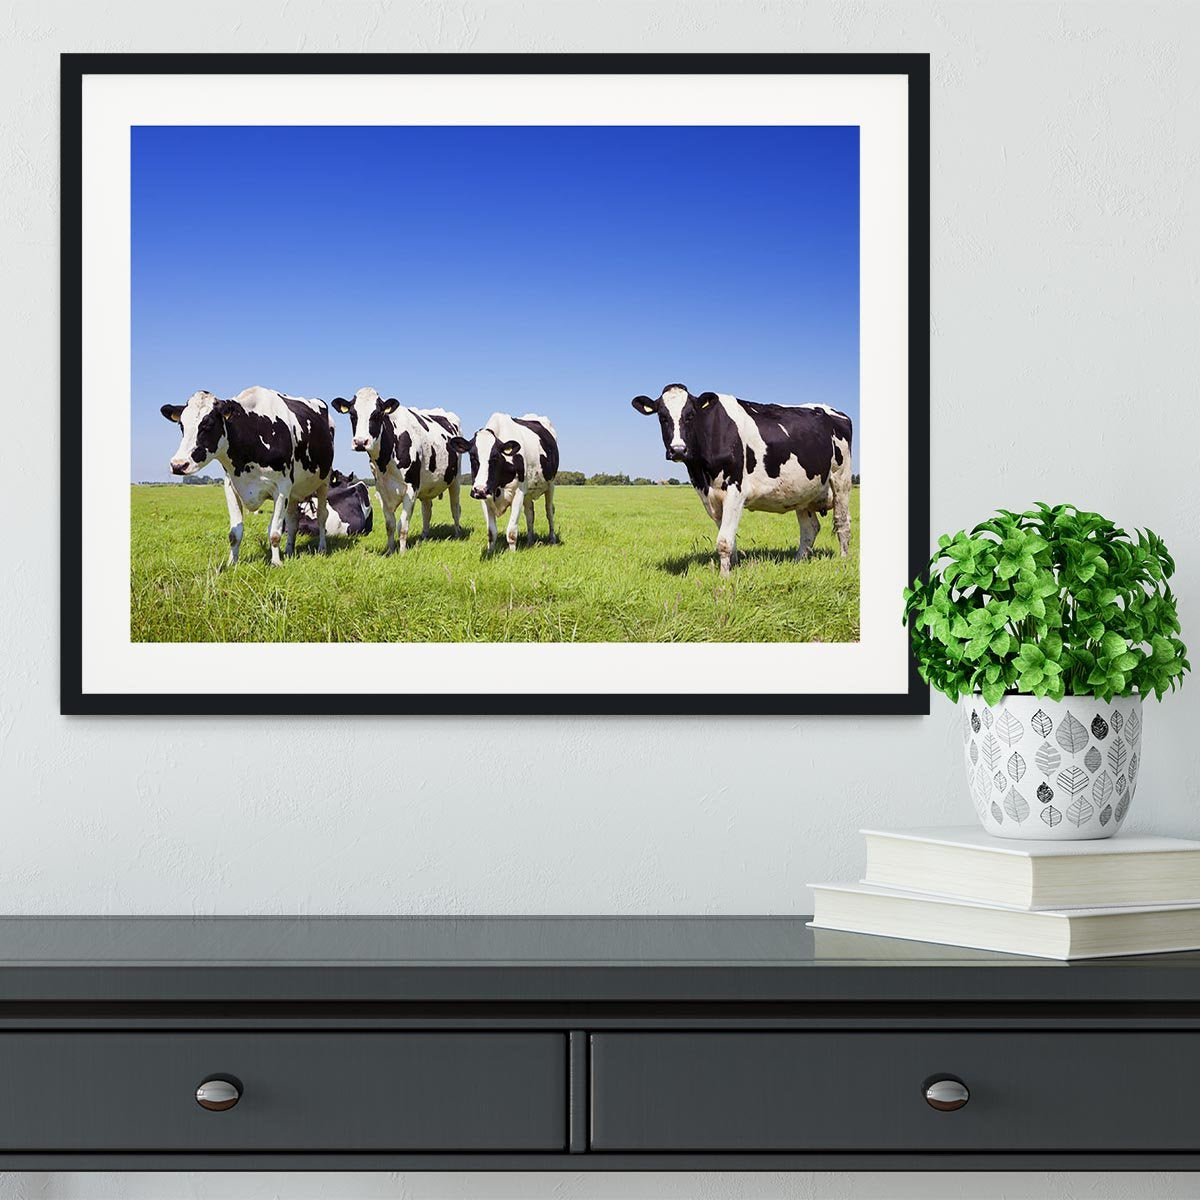 Black and white cows in a grassy field Framed Print - Canvas Art Rocks - 1